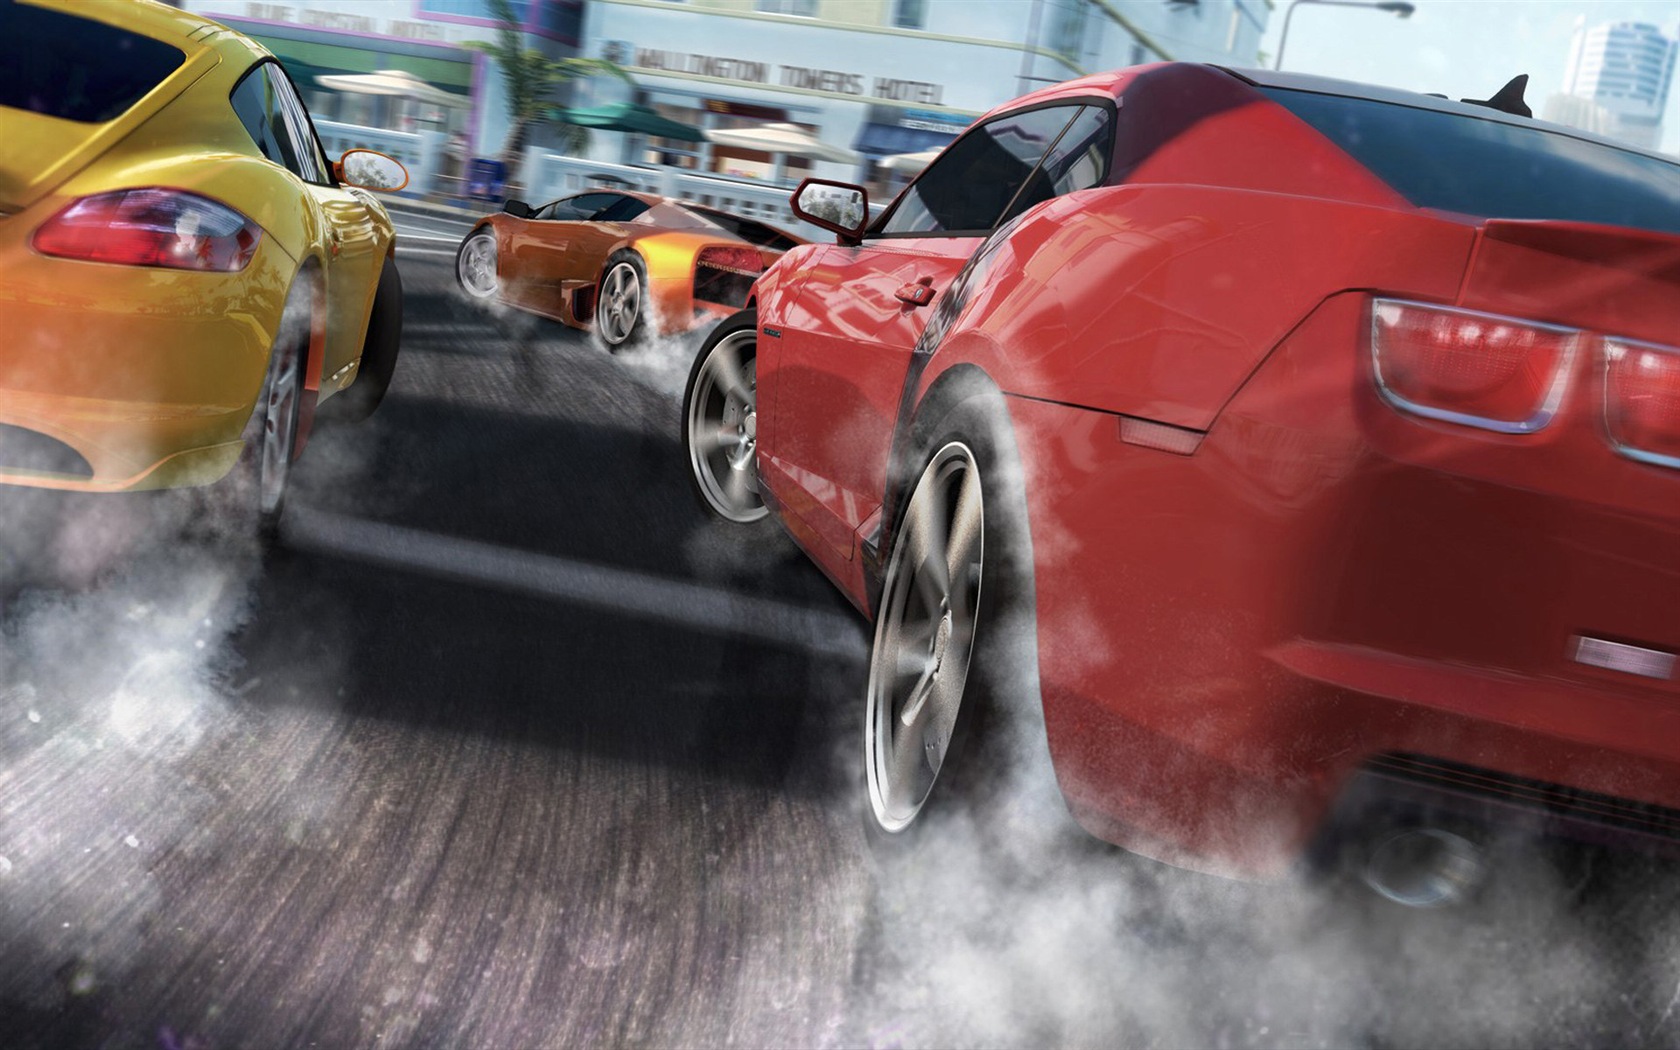 The Crew game HD wallpapers #6 - 1680x1050